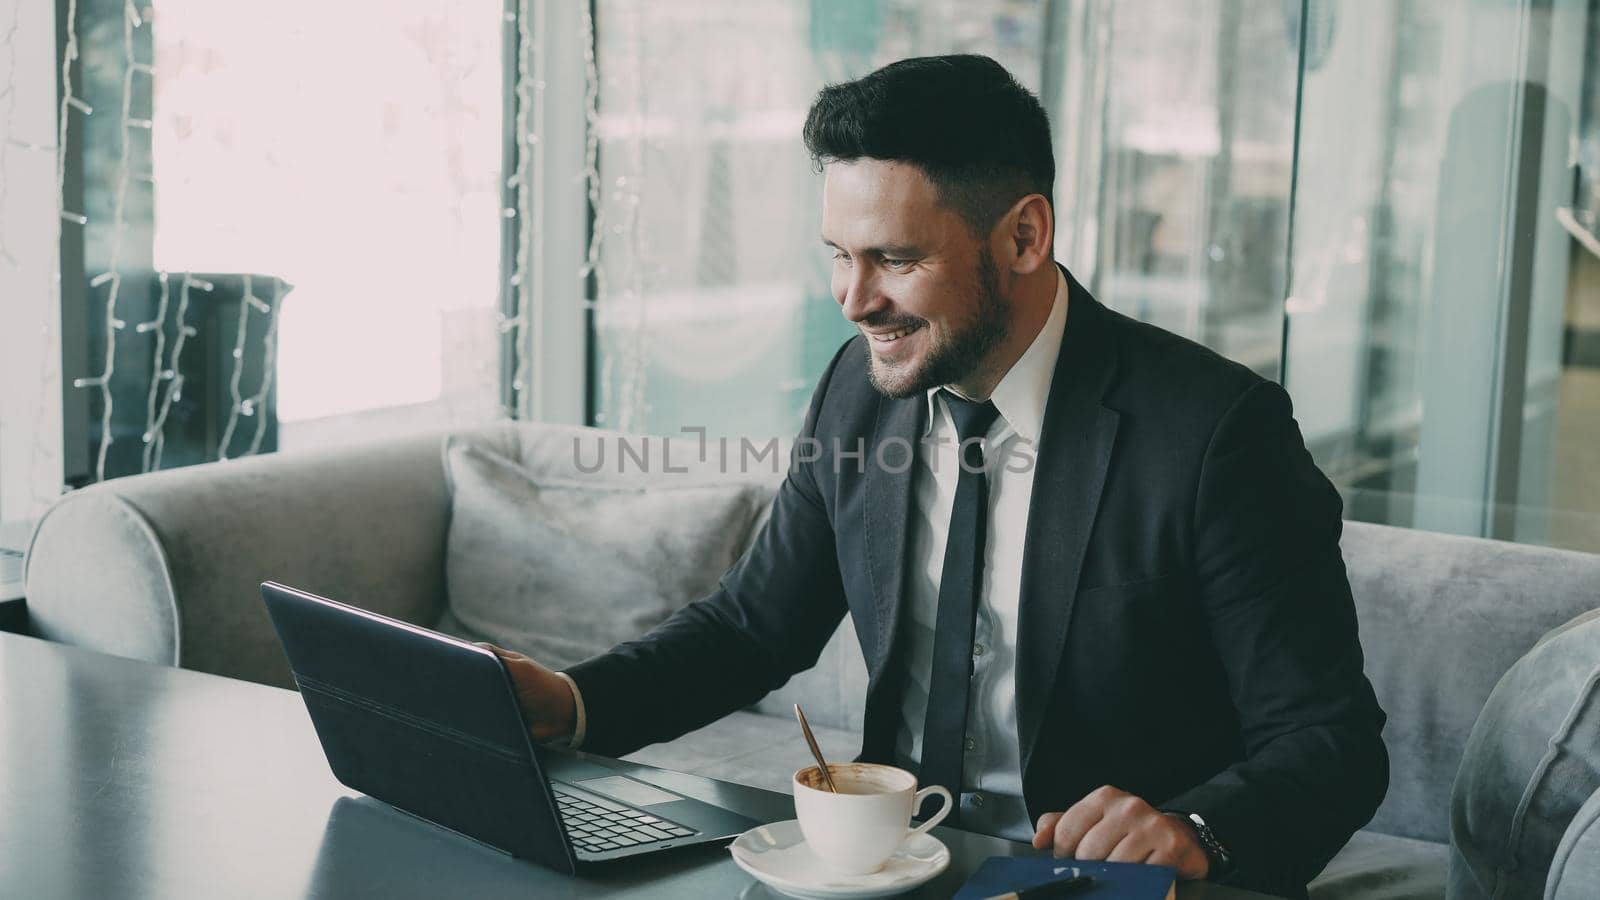 Cheery bearded Caucasian businessman in formal clothes chatting to his family through laptop and waving his hand happily in a classy cafe. He gesticulates optimistically and cheerfully.